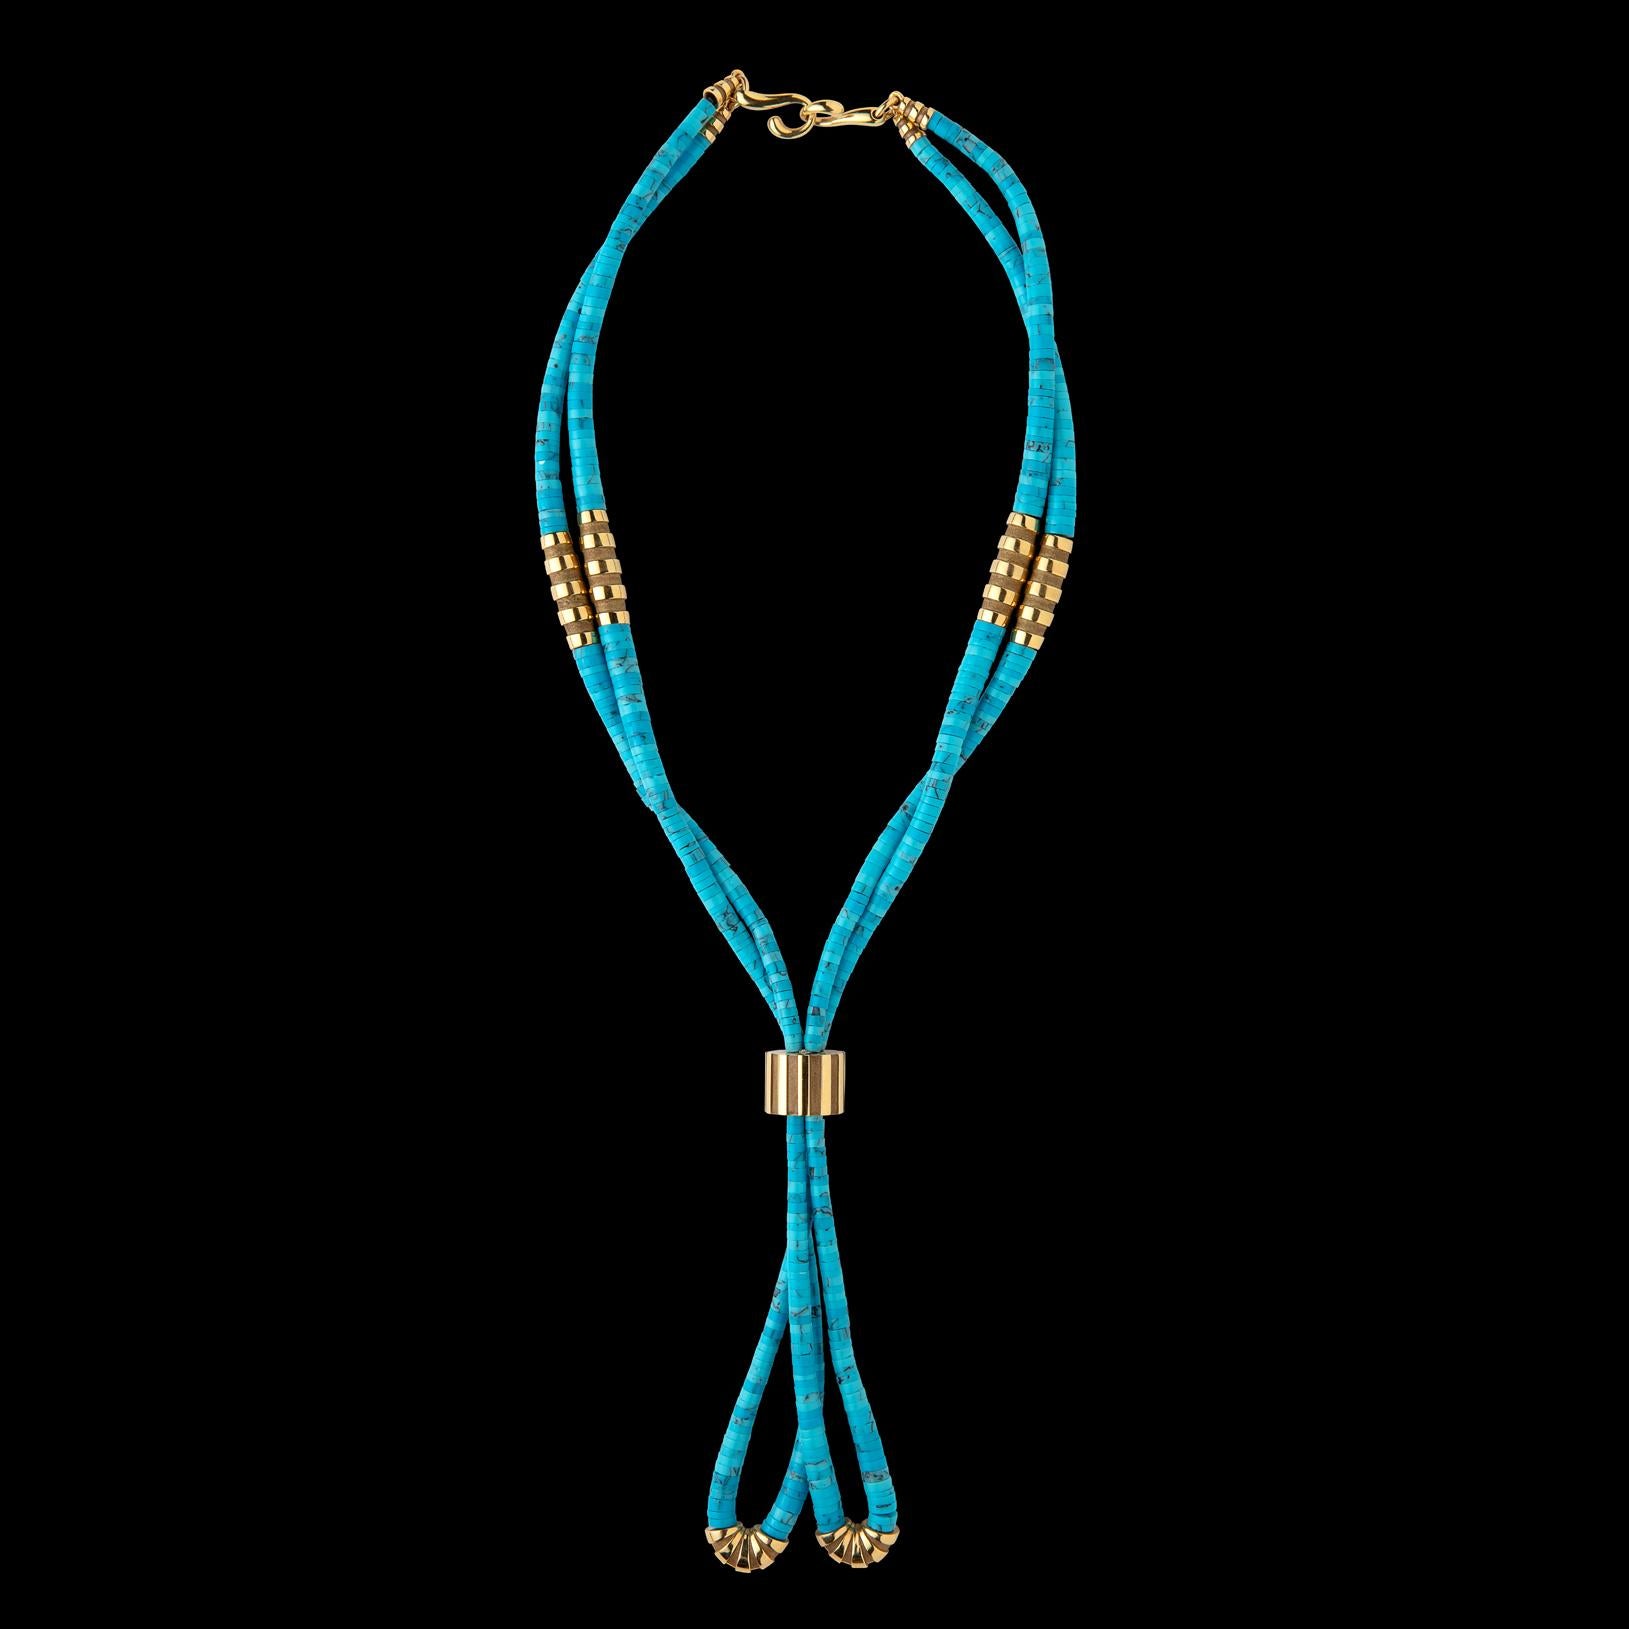 A unique piece by famed French maker Mauboussin, the 18k gold 'Nadja' necklace is designed as two strands of turquoise beads, accented by fluted gold sections of polished/satin finish, and centered by a large gold bead of similar design. The length